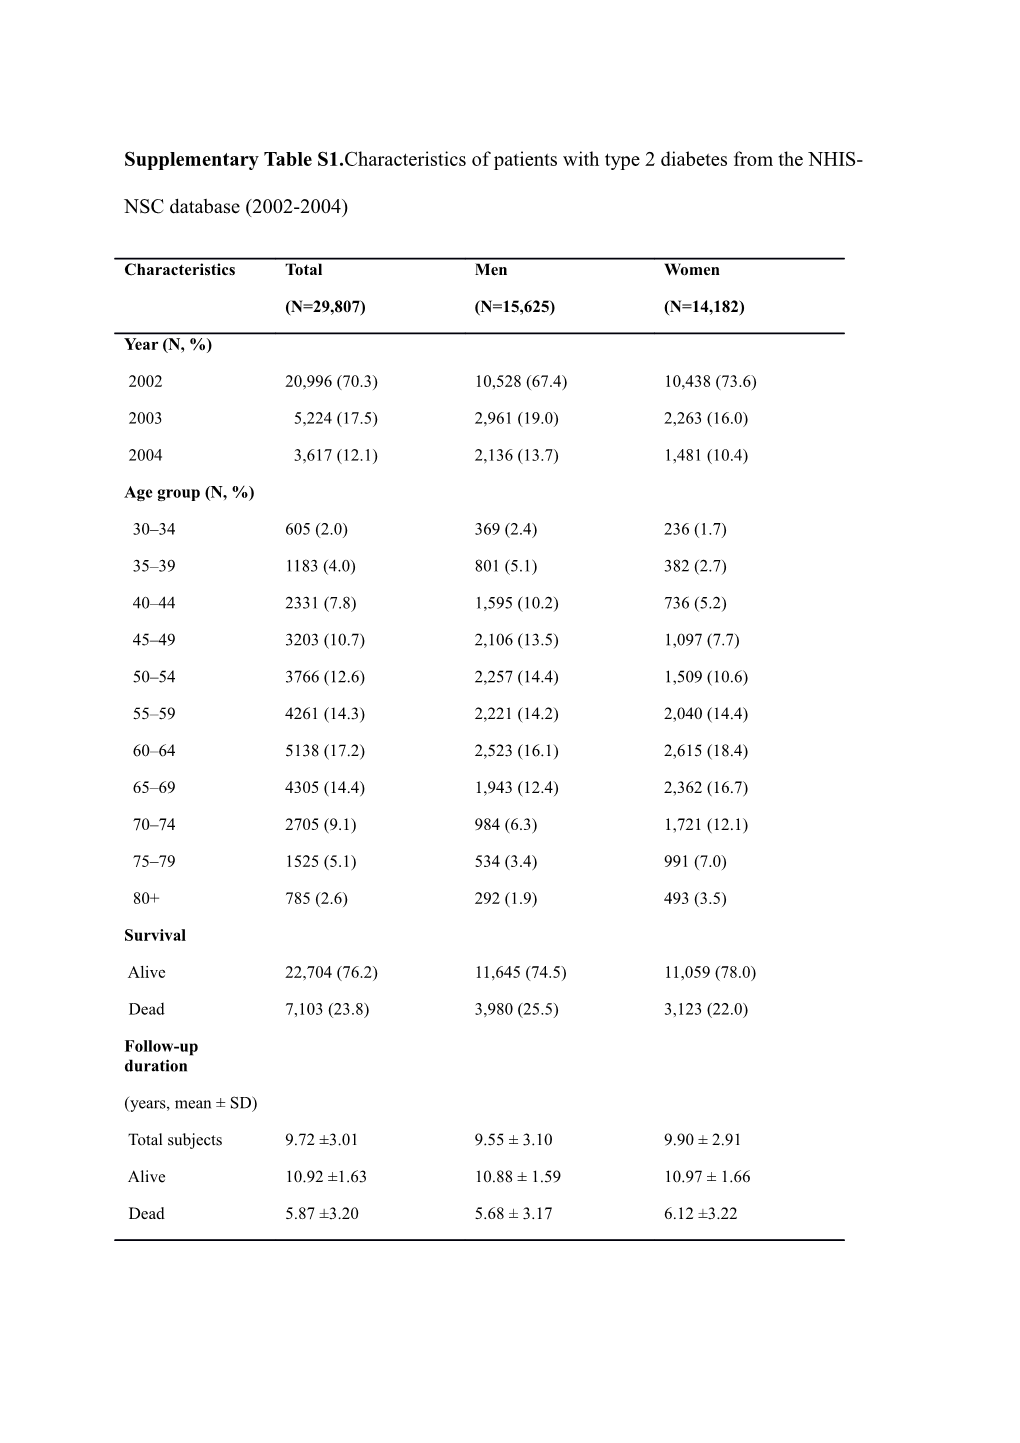 Supplementarytable S1. Characteristics of Patients with Type 2 Diabetes from the NHIS-NSC